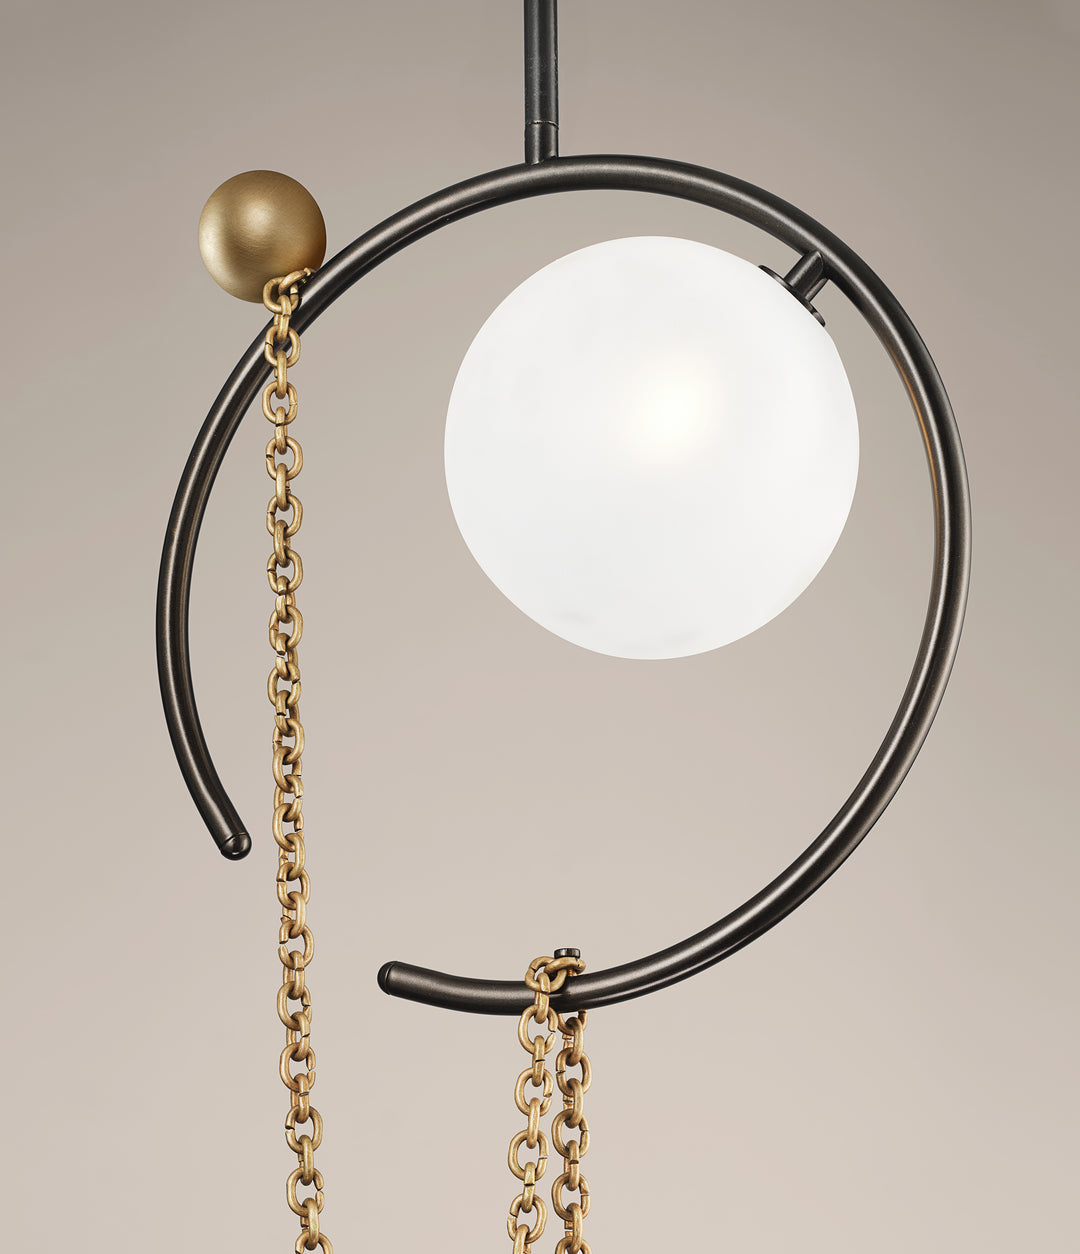 Madeleine Pendant with Calacatta Marble (canopy), Dark Bronze Enamel (frame), and Natural Brass (chain)